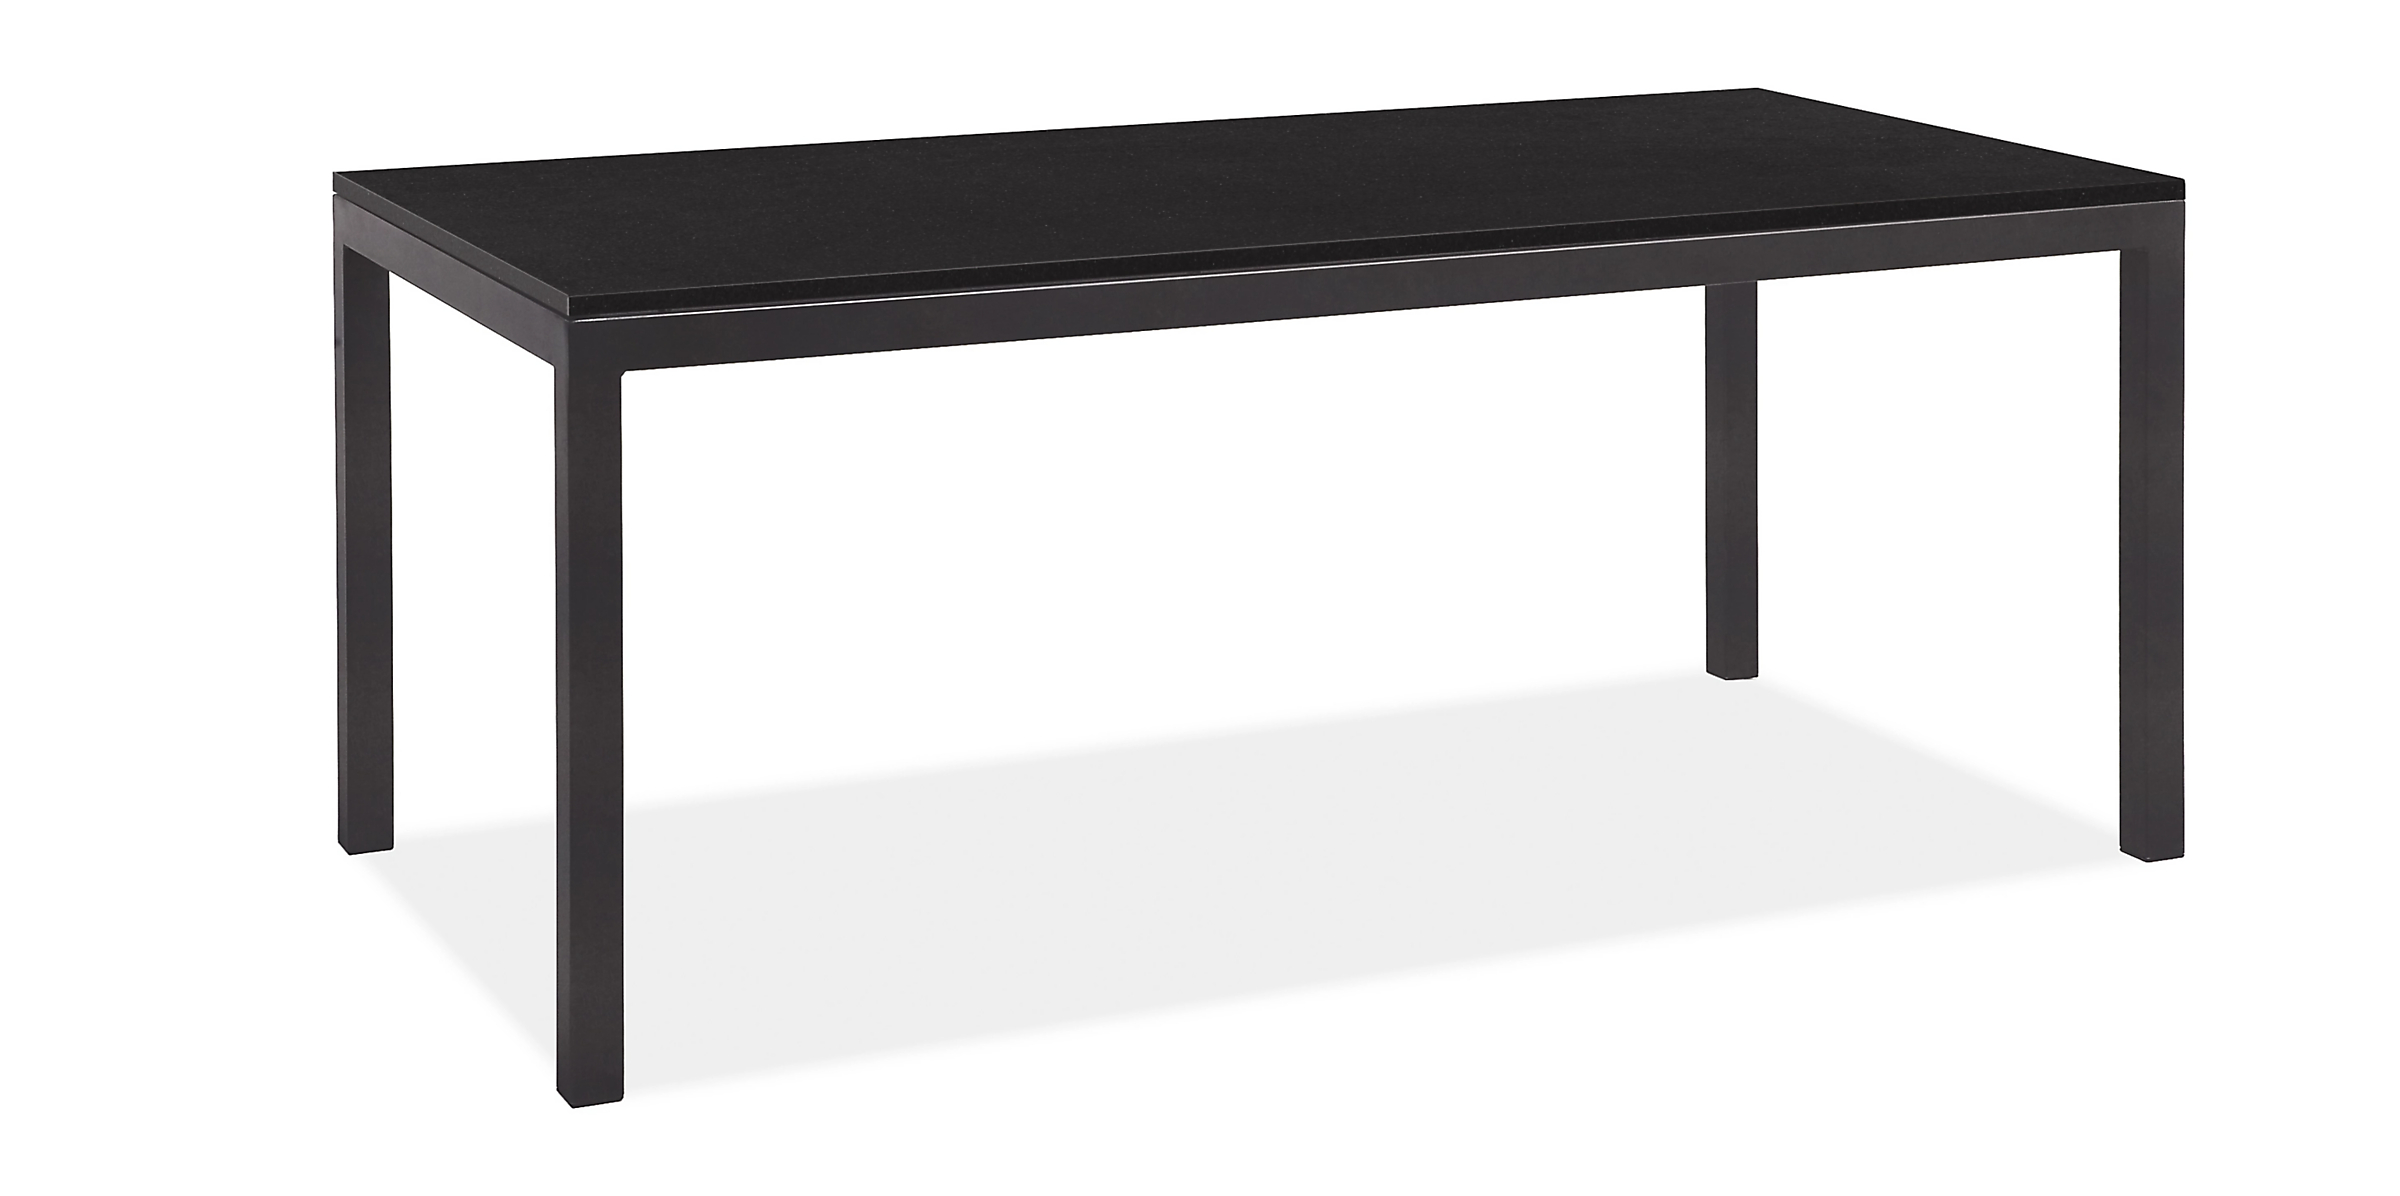 Parsons 78w 42d 29h Dining Table in 2" Natural Steel and Black Quartz Top